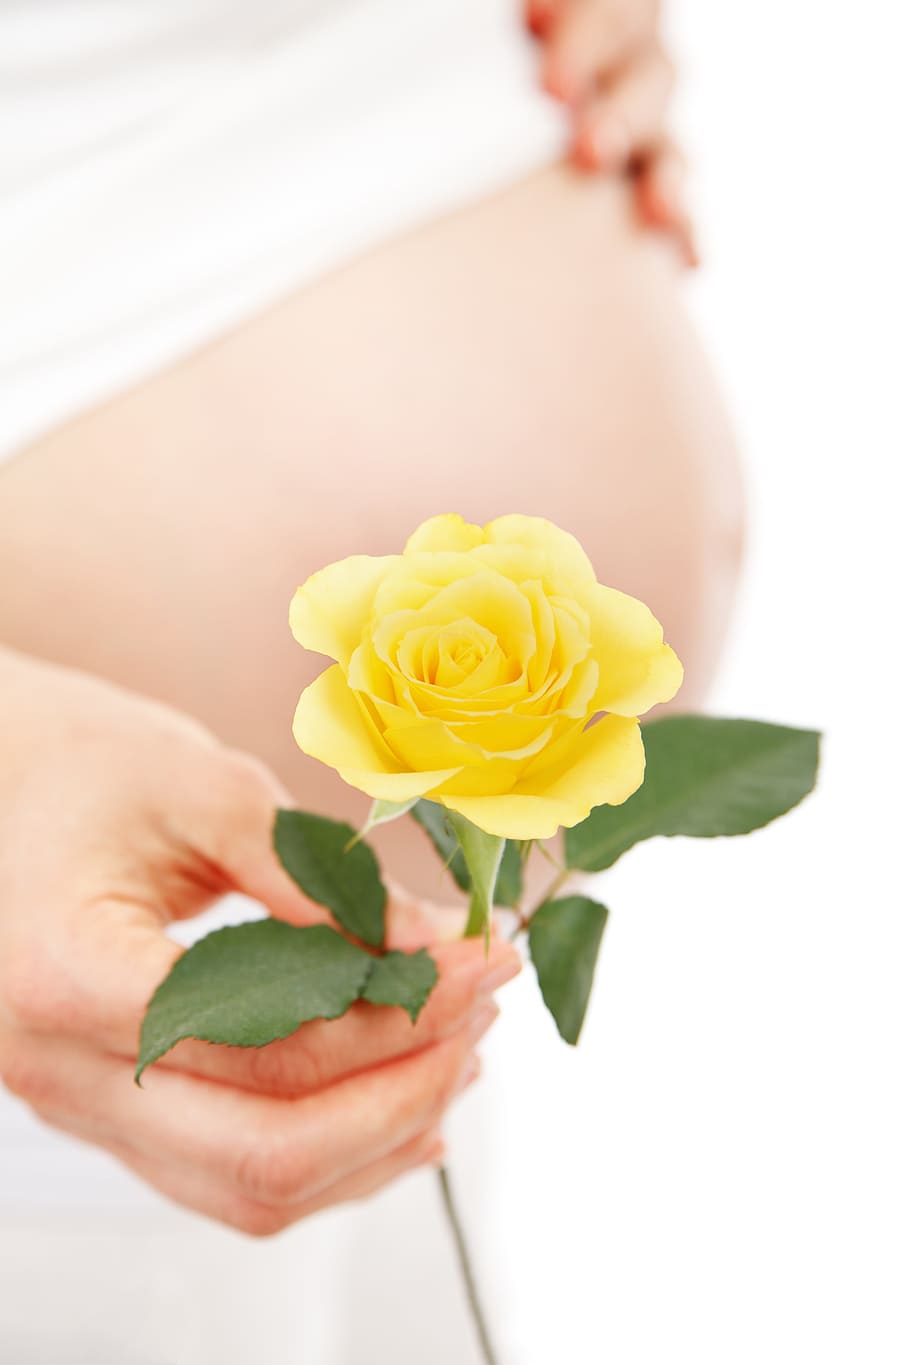 person, holding, yellow, petaled flower, yellow rose, baby, belly, body, expecting, female